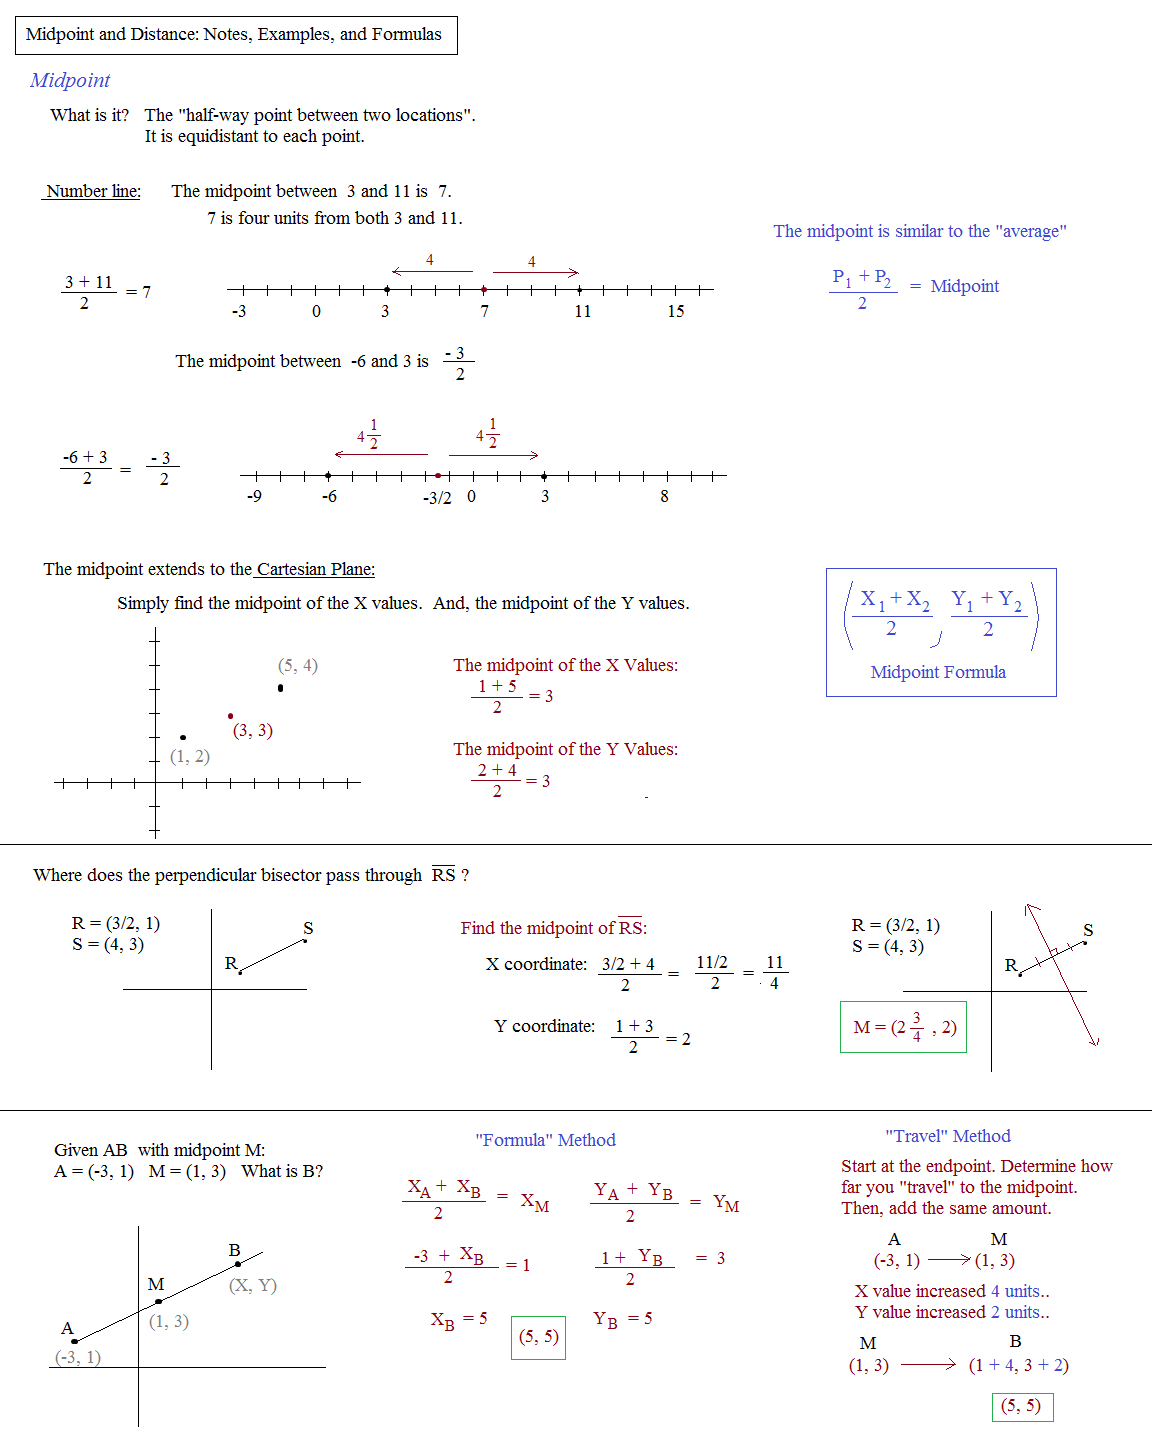 midpoint-and-distance-formula-worksheet-pdf-db-excel